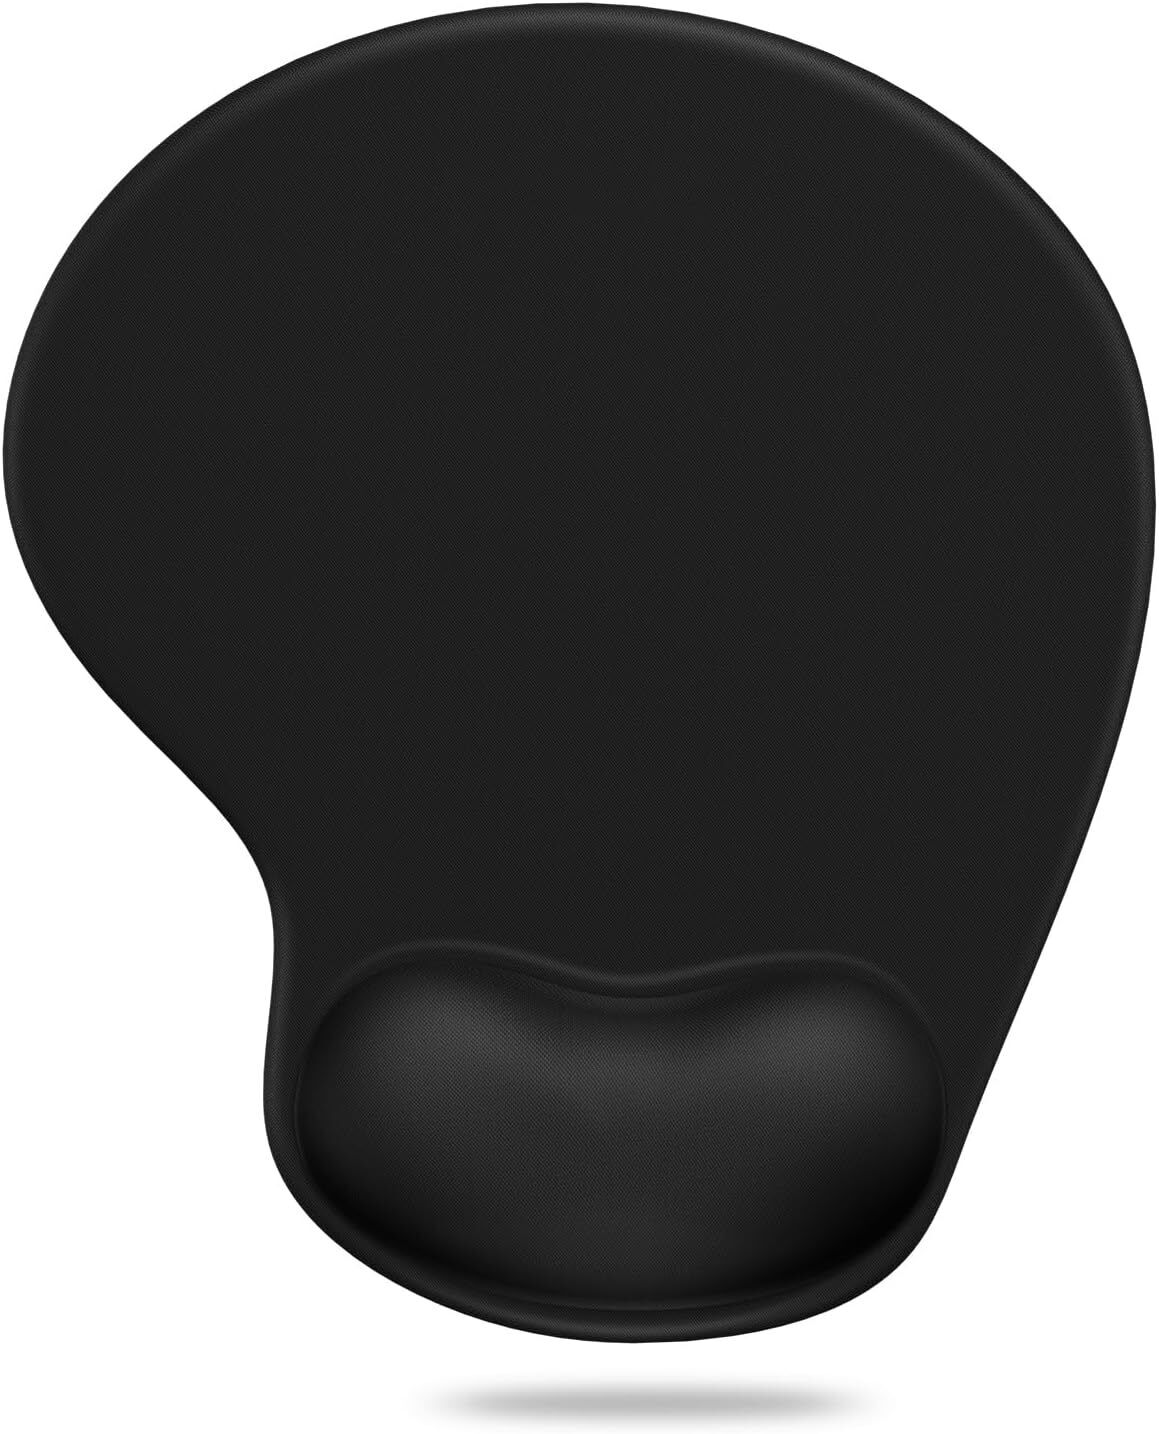 Ergonomic Mouse Pad with Comfortable Gel Wrist Rest Support and Lycra Cloth